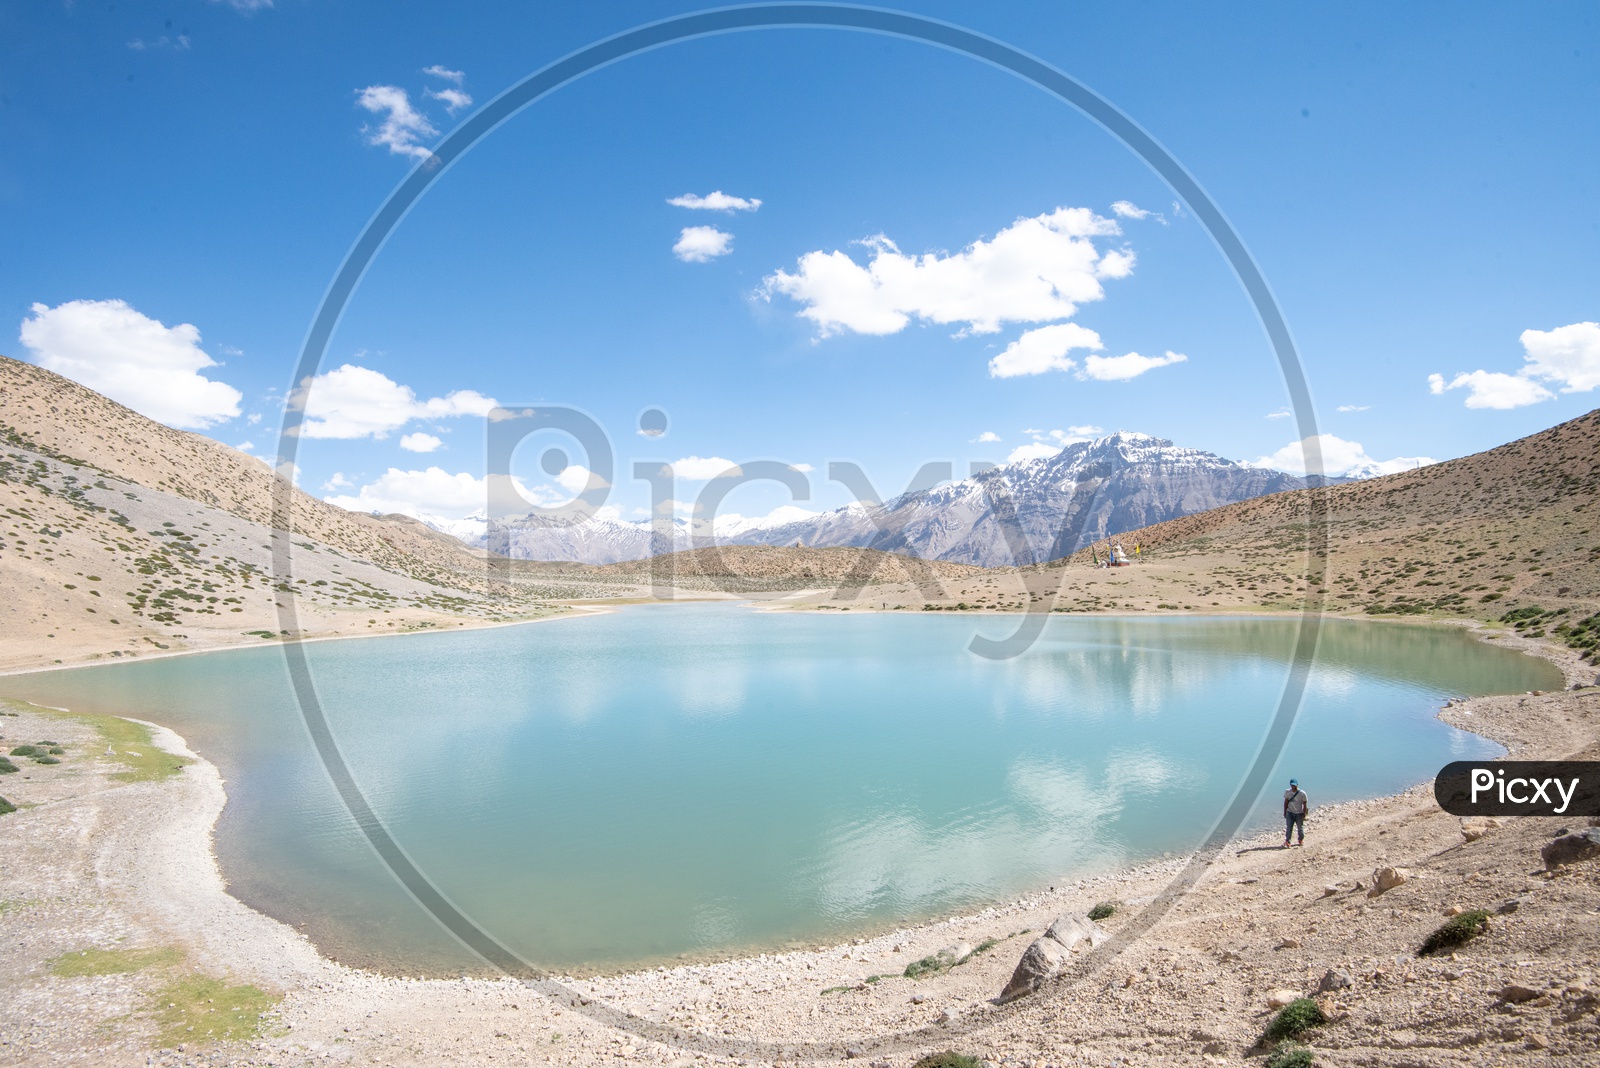 Tourist at Dhankar lake with mountain peaks in the background